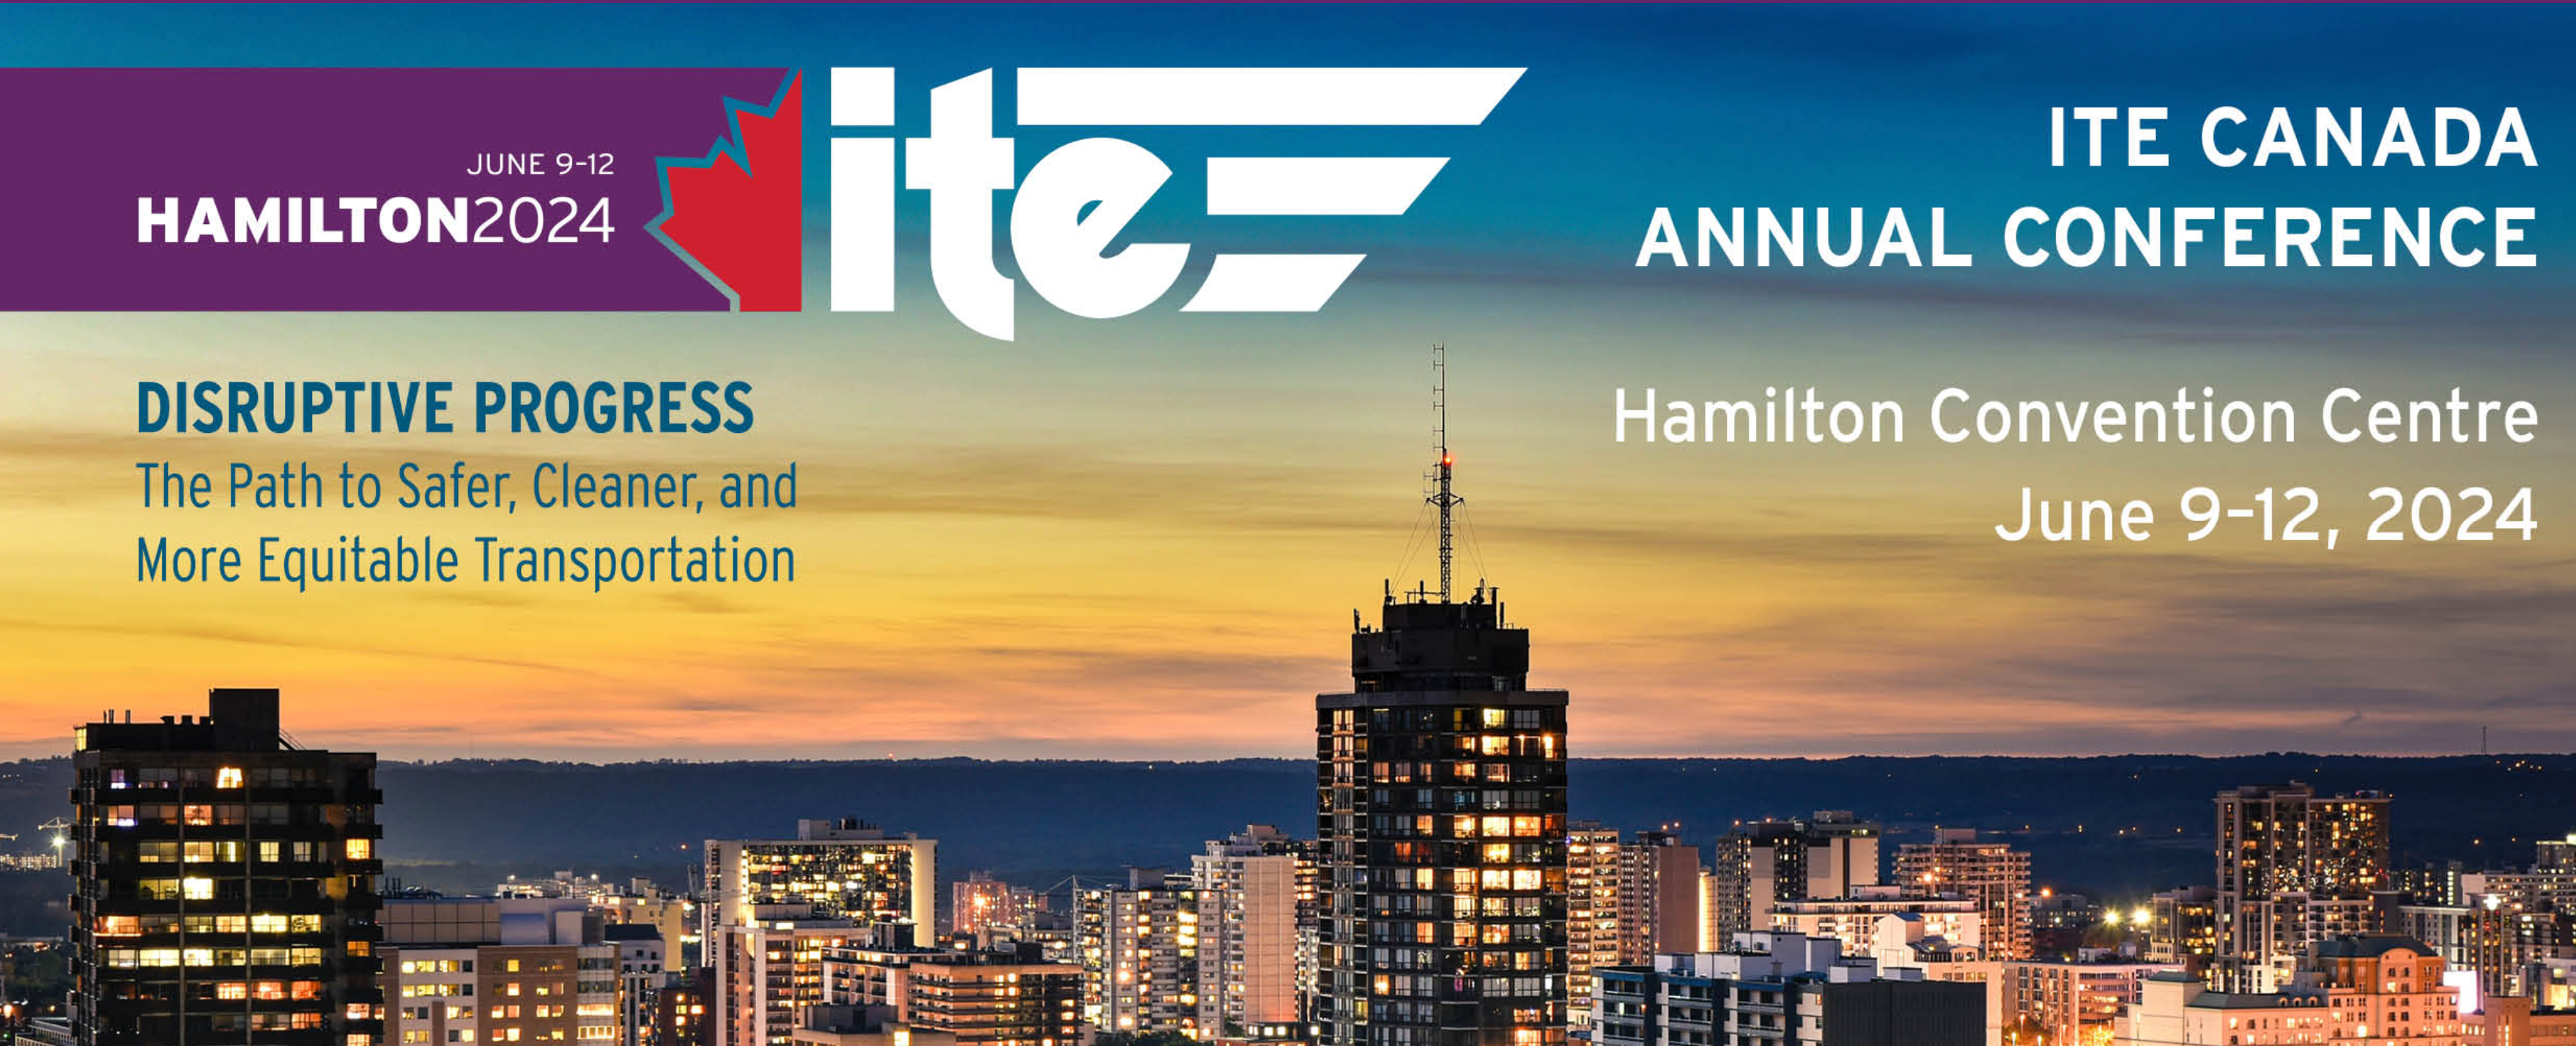 ITE Conference Header